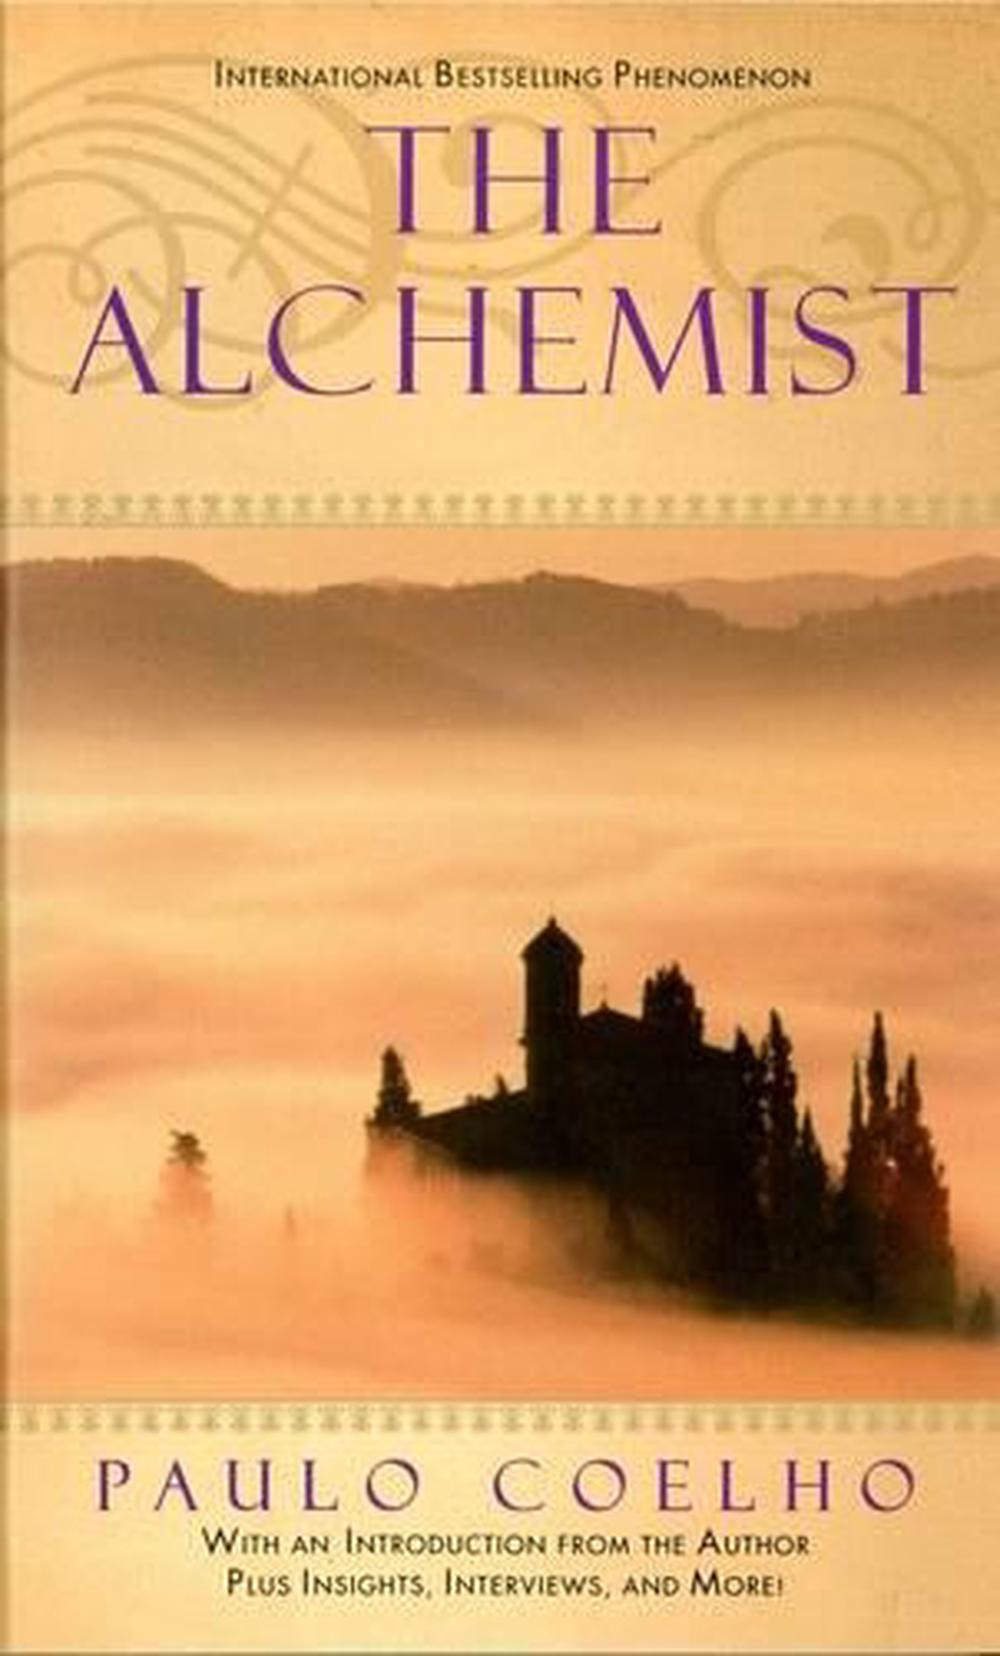 detailed book review of alchemist